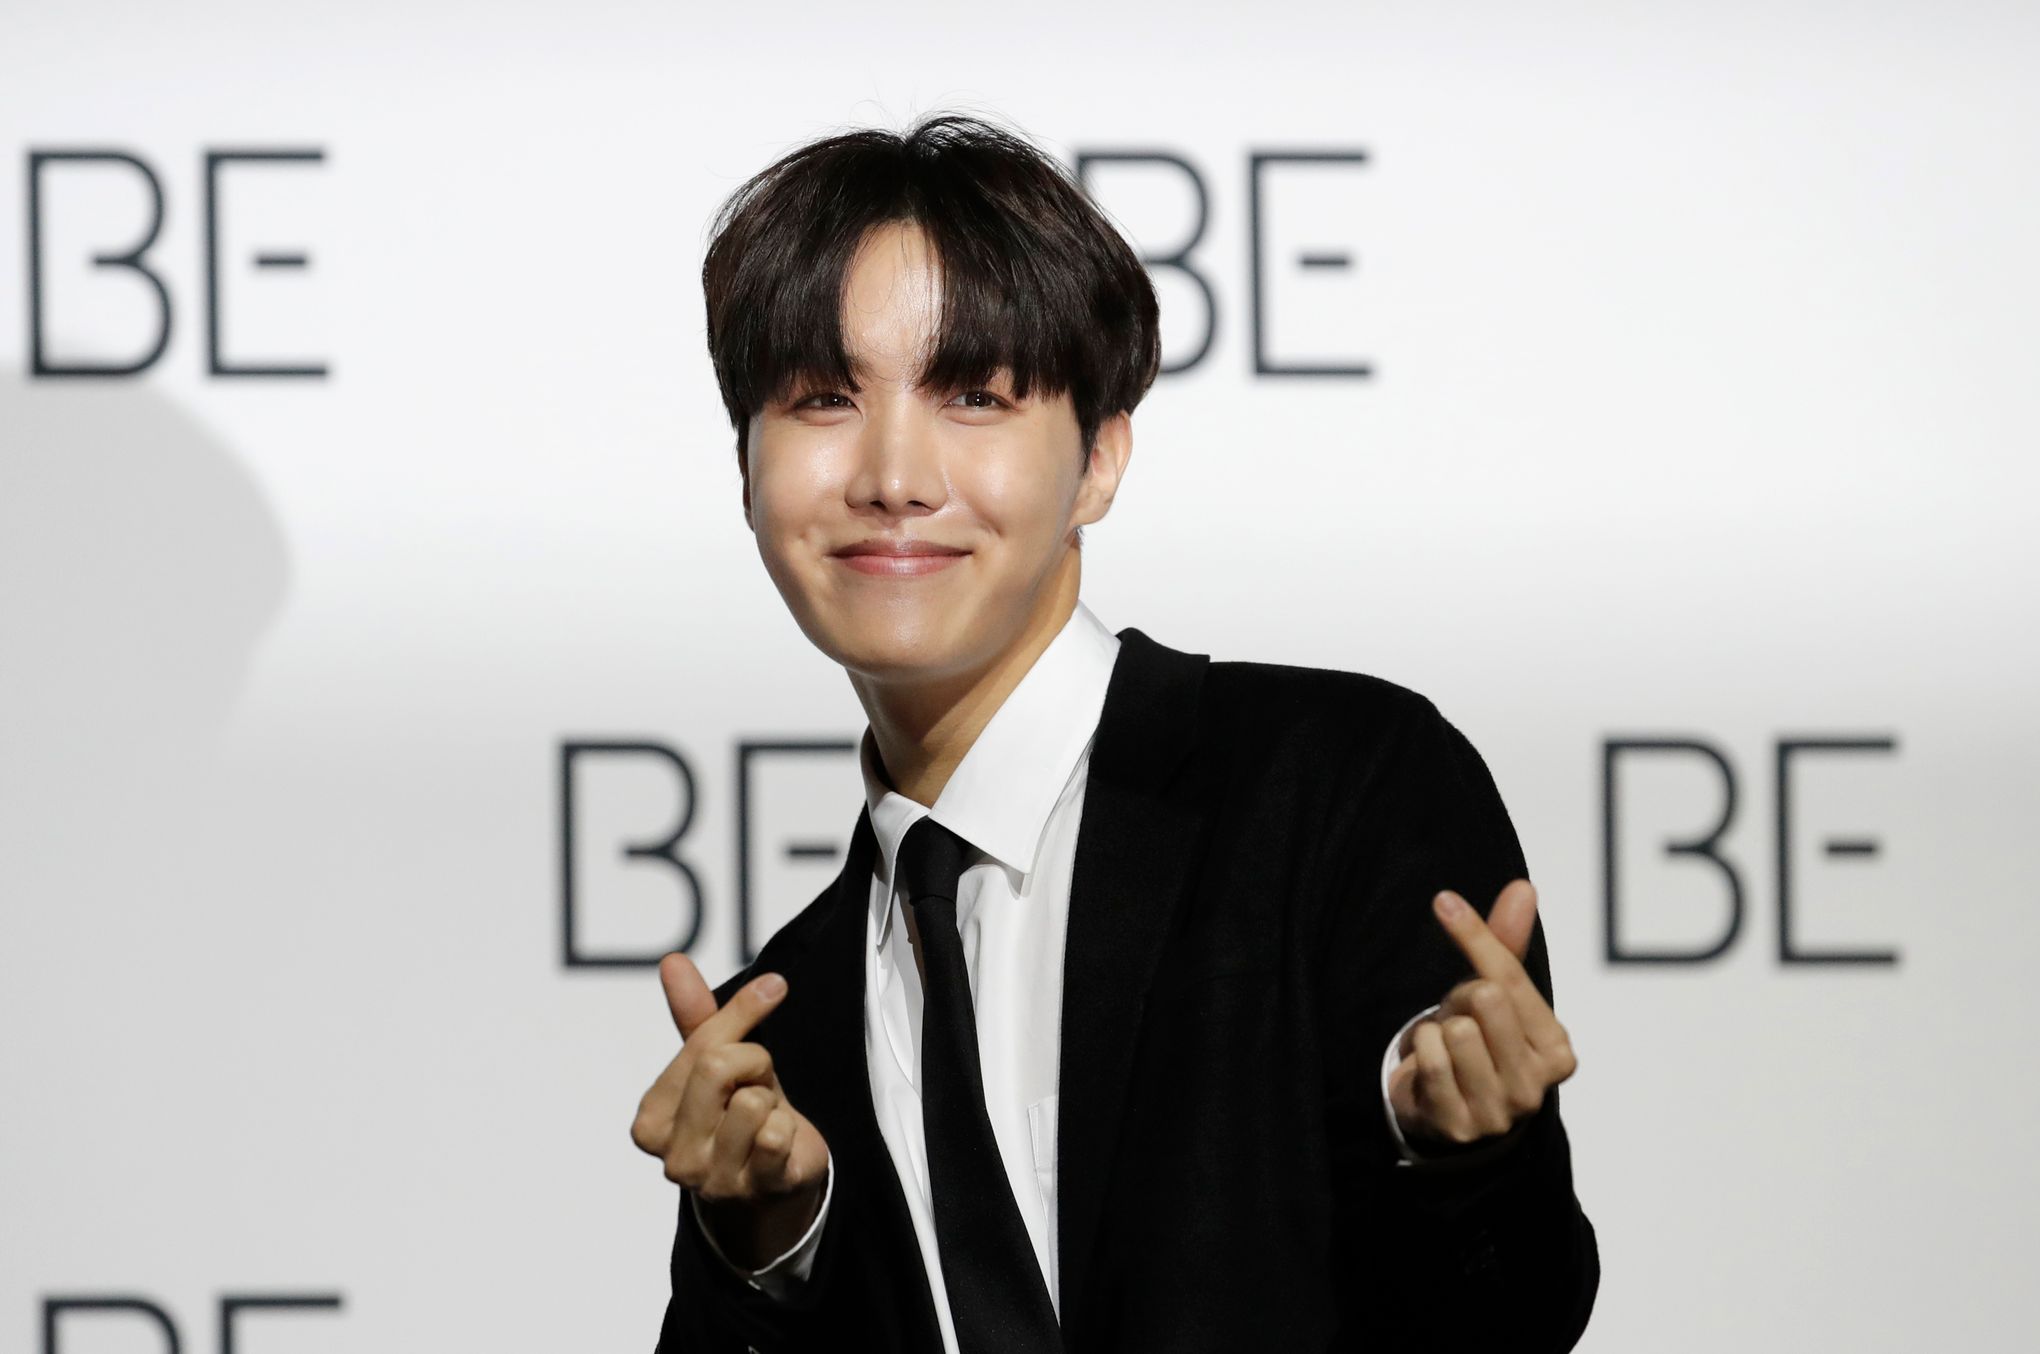 J-Hope Joins His BTS Bandmates Jimin, Suga And RM In A Special